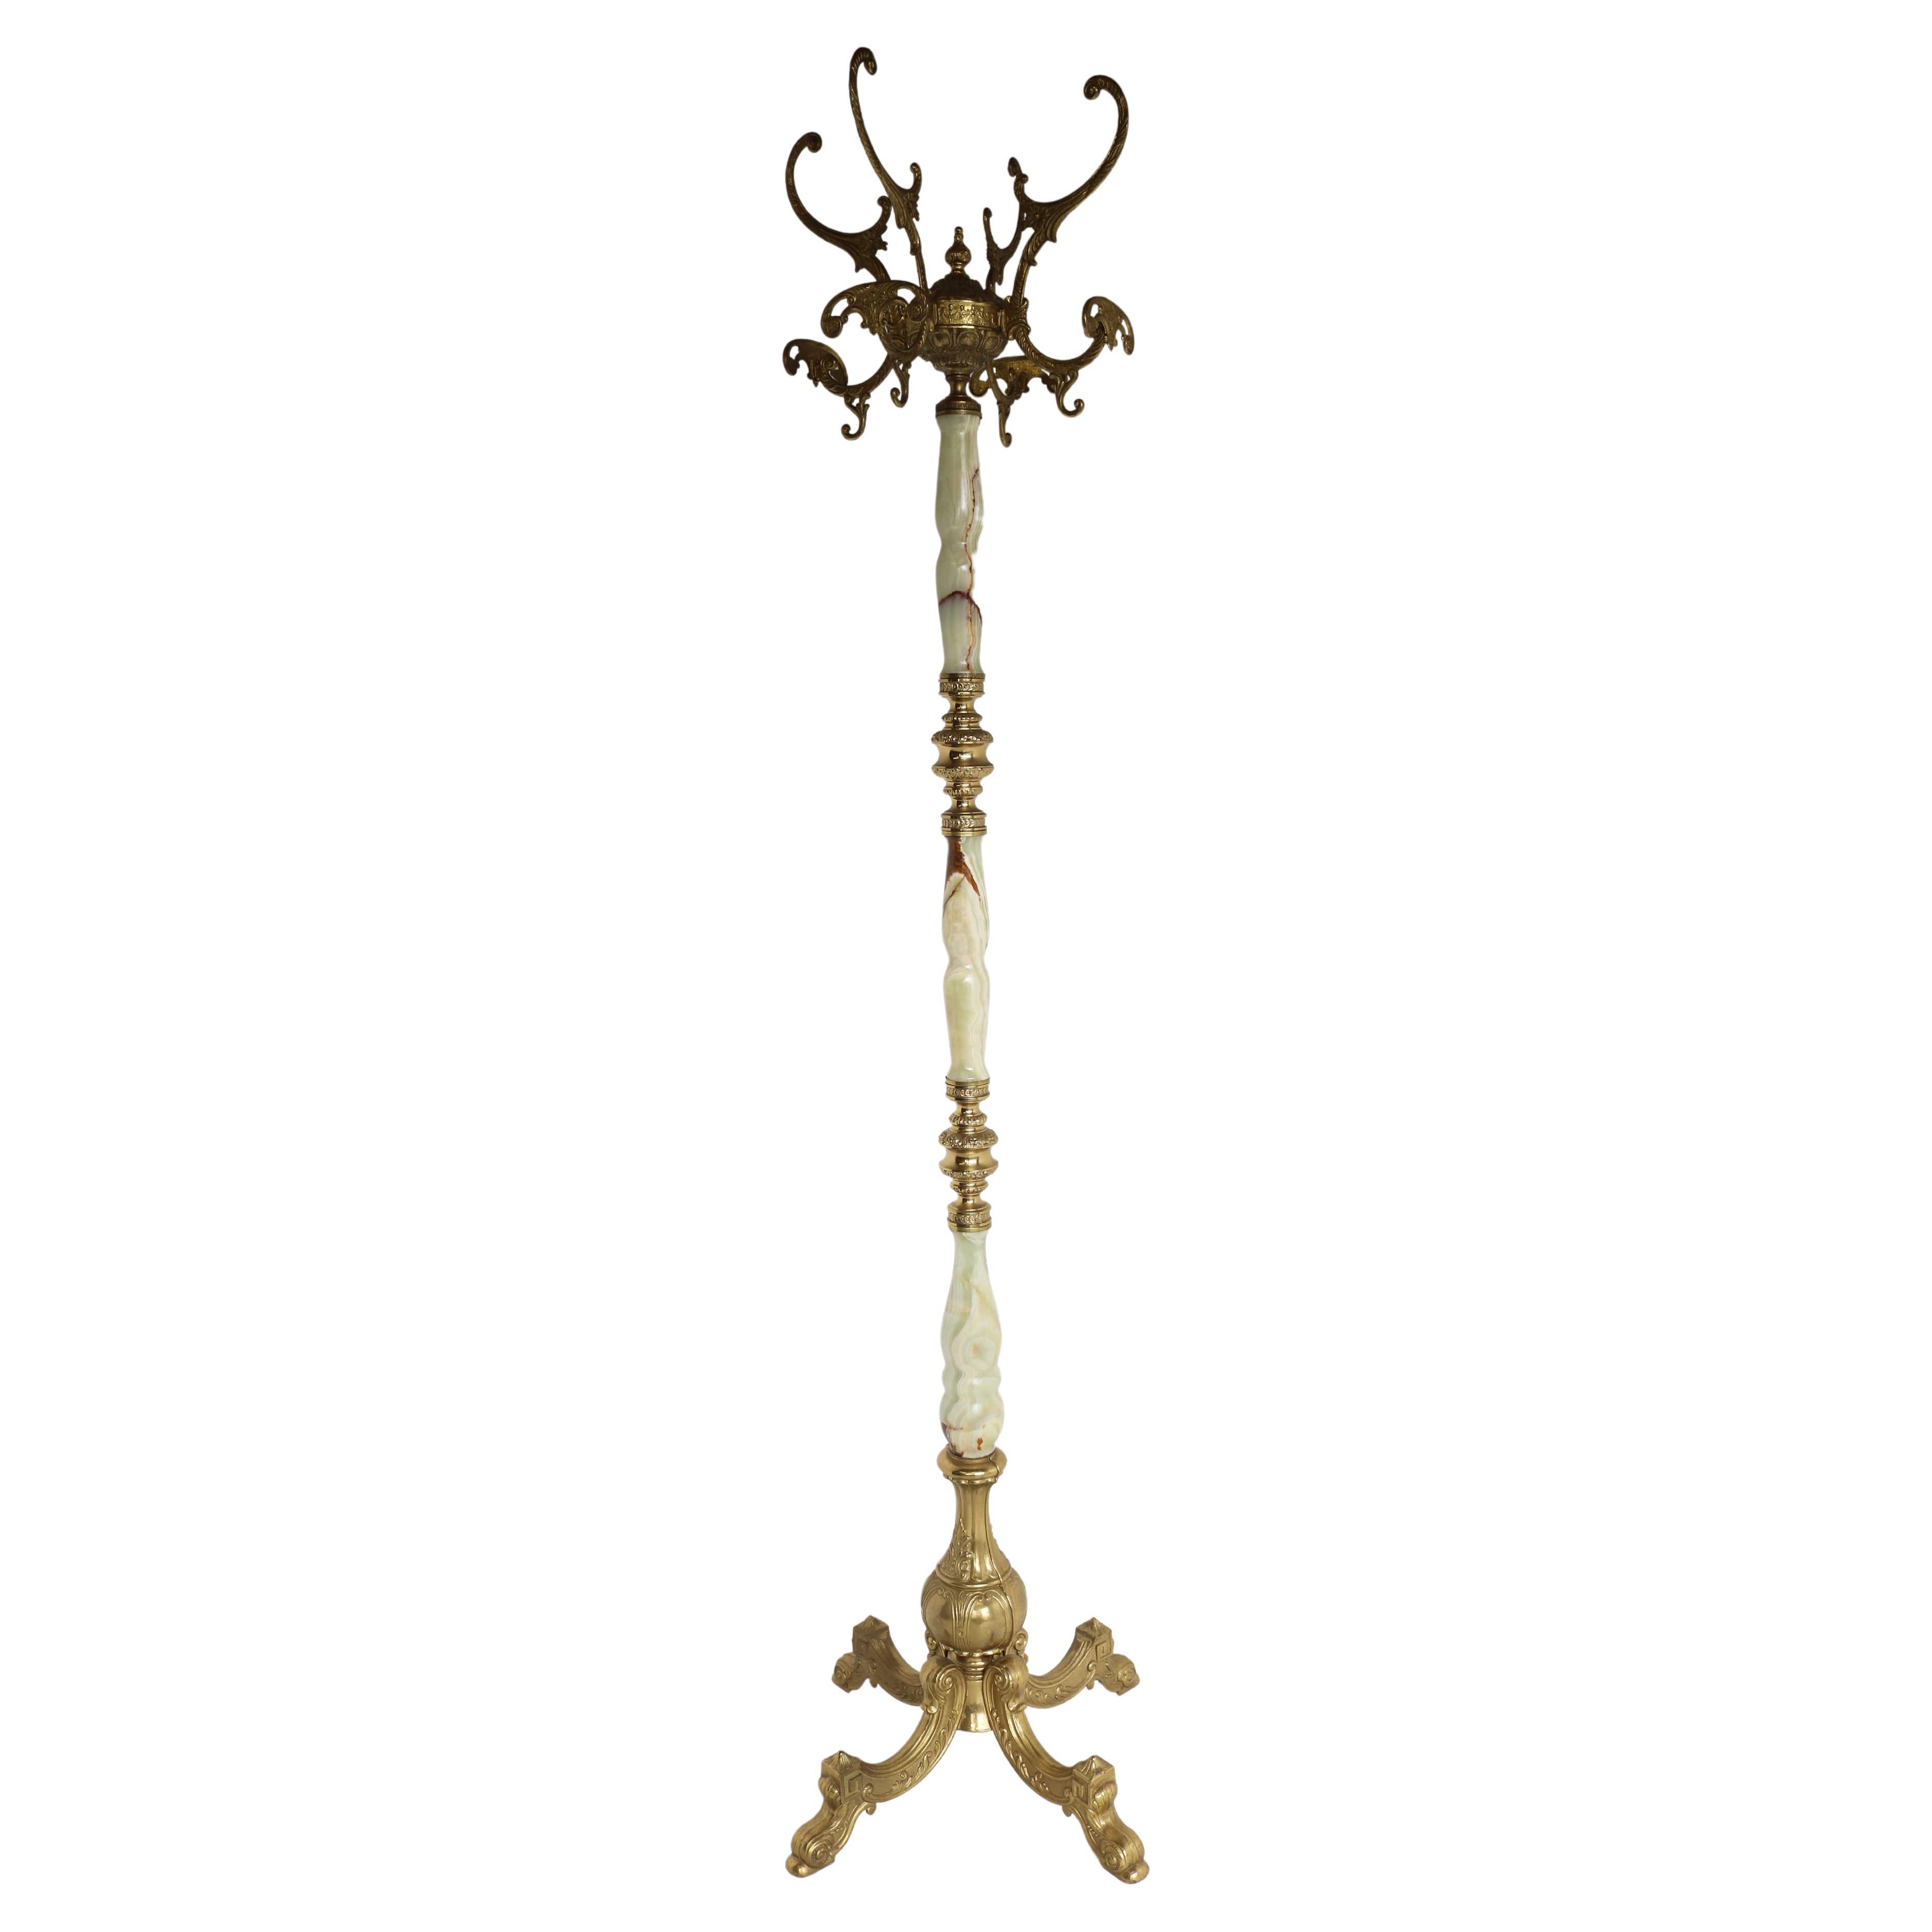 Italian Ornate Antique Brass & Onyx Round Marble Coat Hat Rack Hall Tree 1950s

This high quality free standing , ornate hall tree dates to the 1950's.
Is crafted from round onyx marble and casted brass and has numerous beautiful details.
With a big